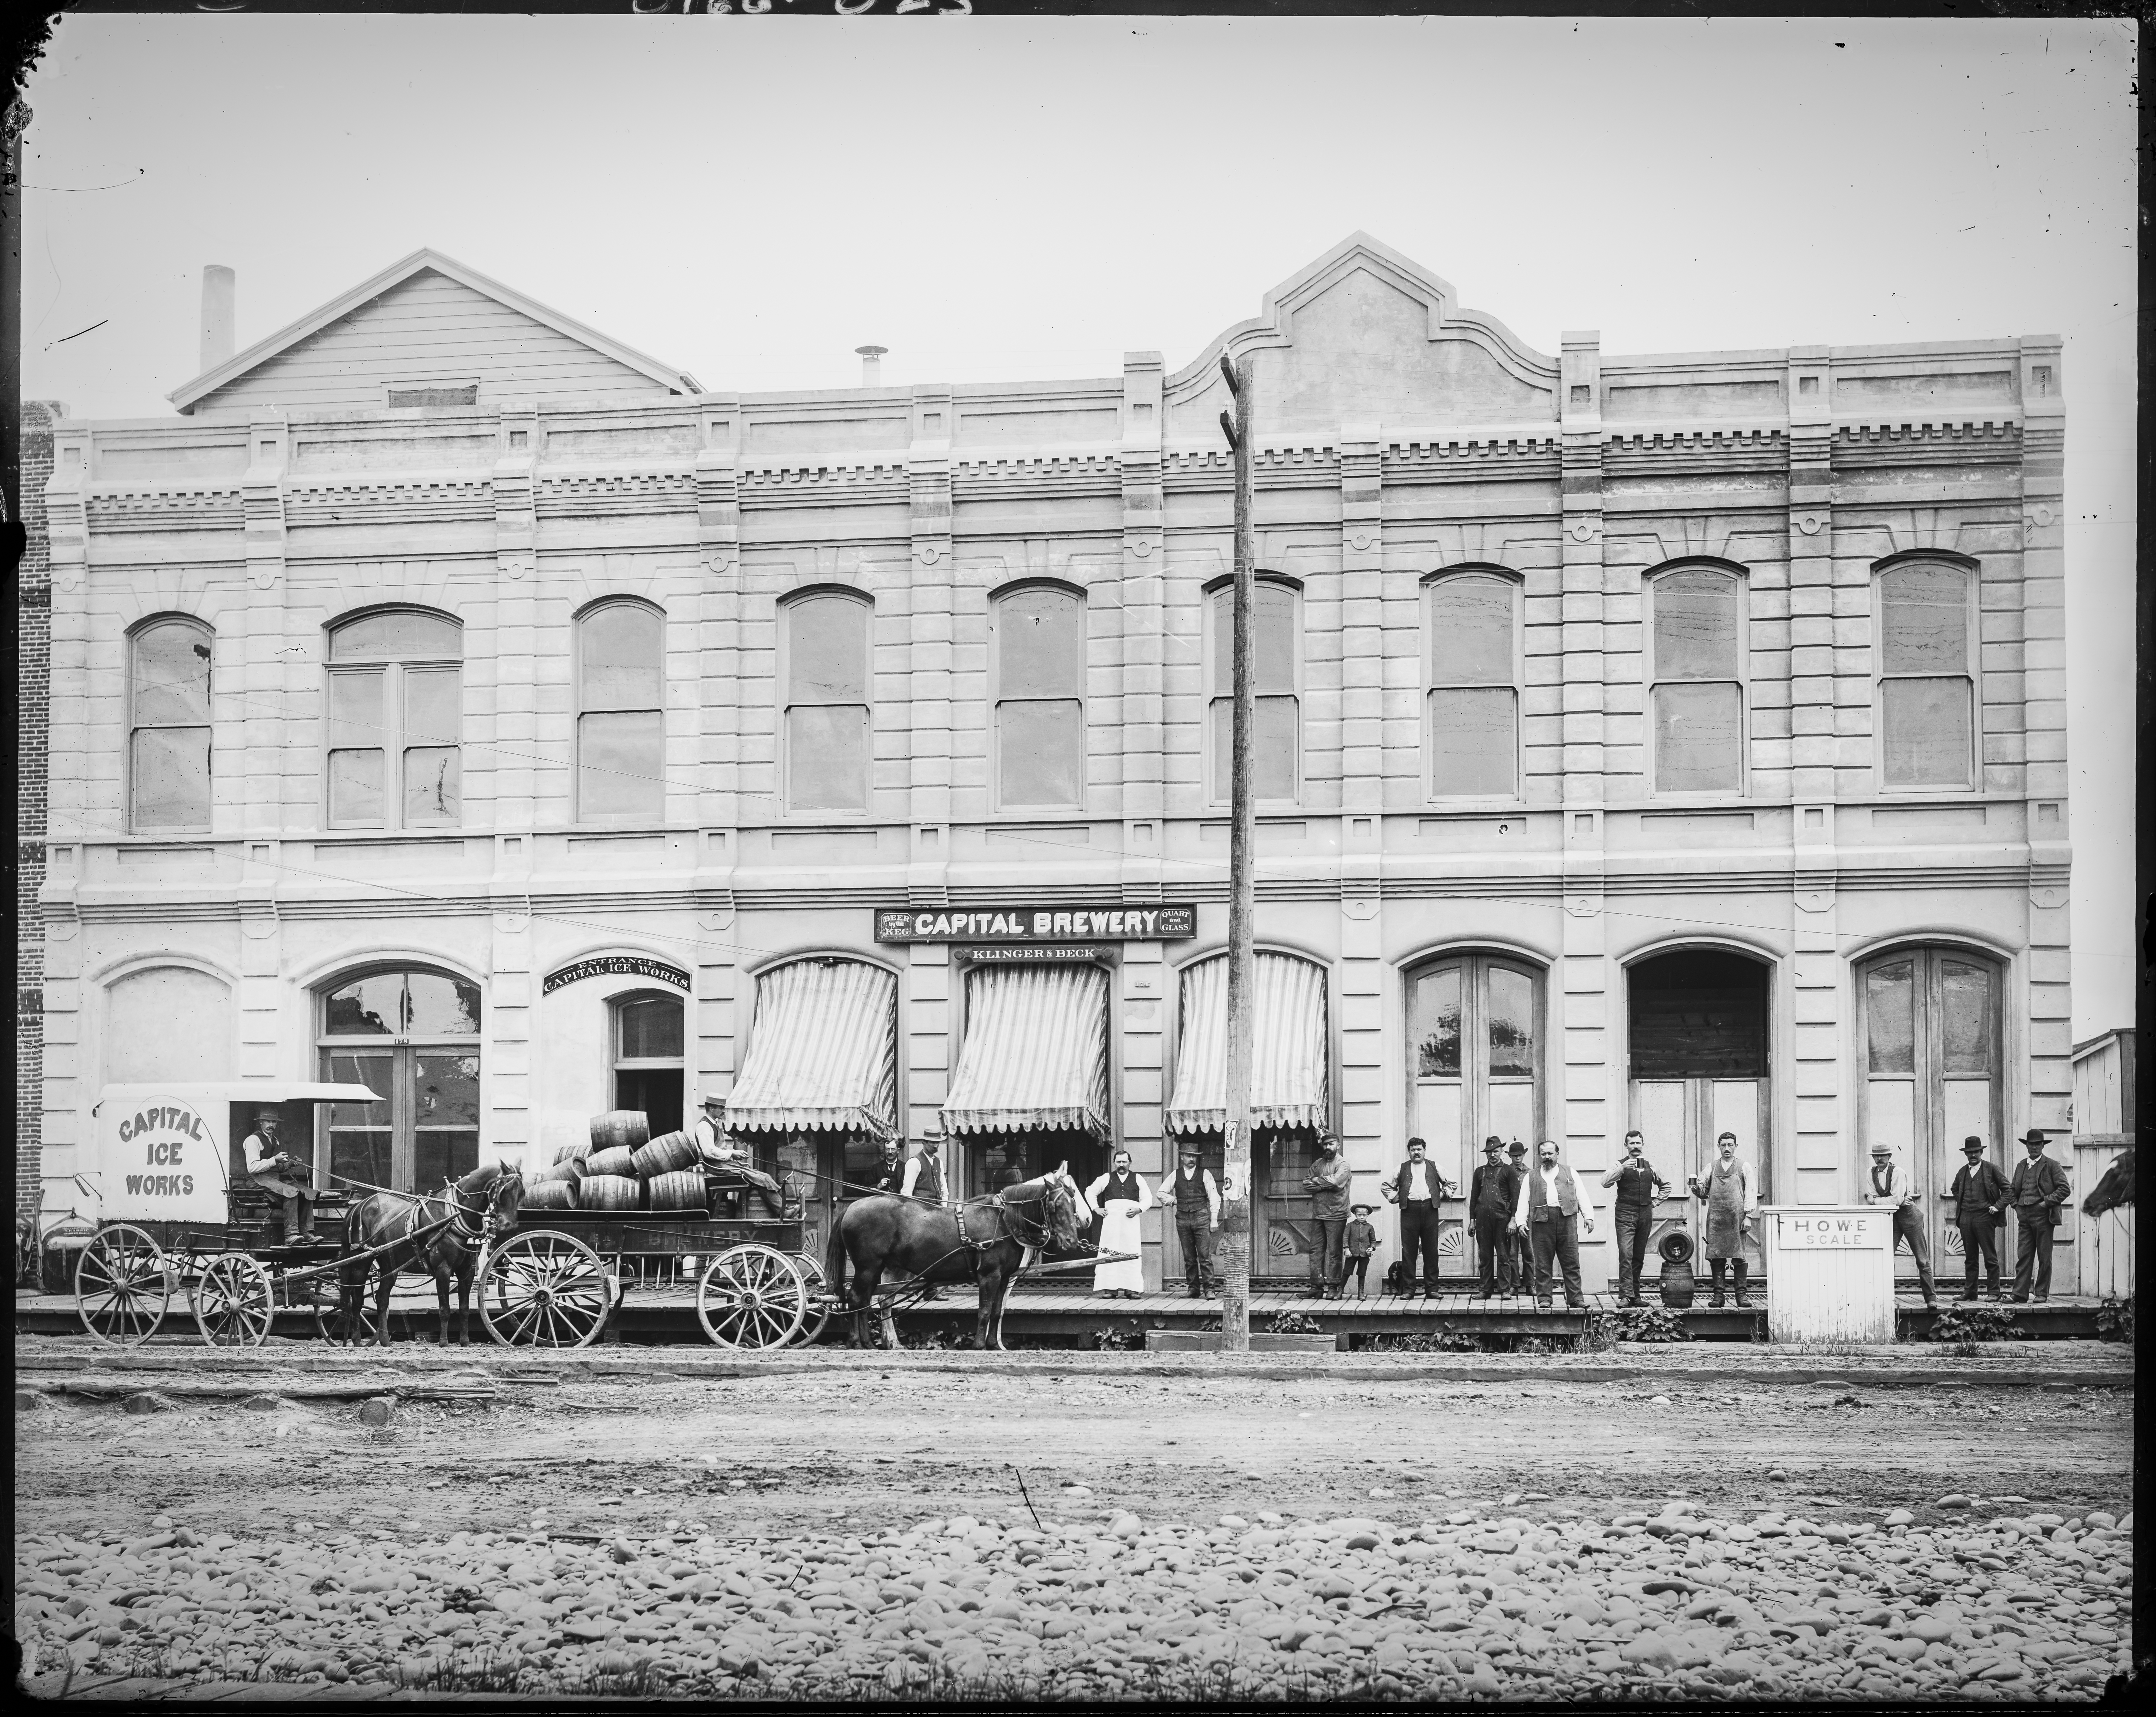 Capital Brewery in Salem with ice wagon, c. 1890, Oregon Historical Society Research Library, 0166G023